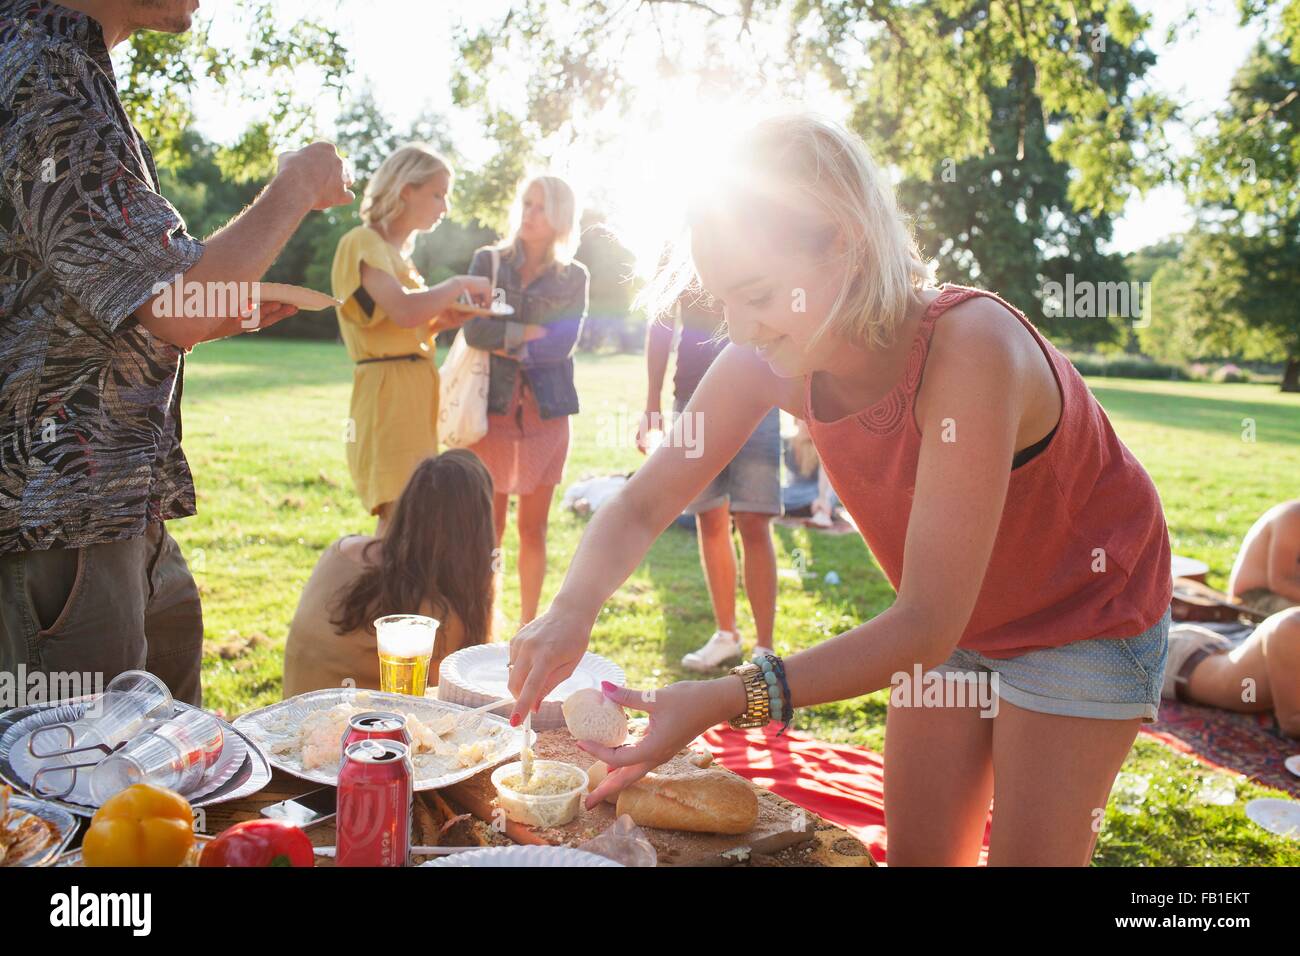 Young woman selecting food at group party picnic in park Stock Photo